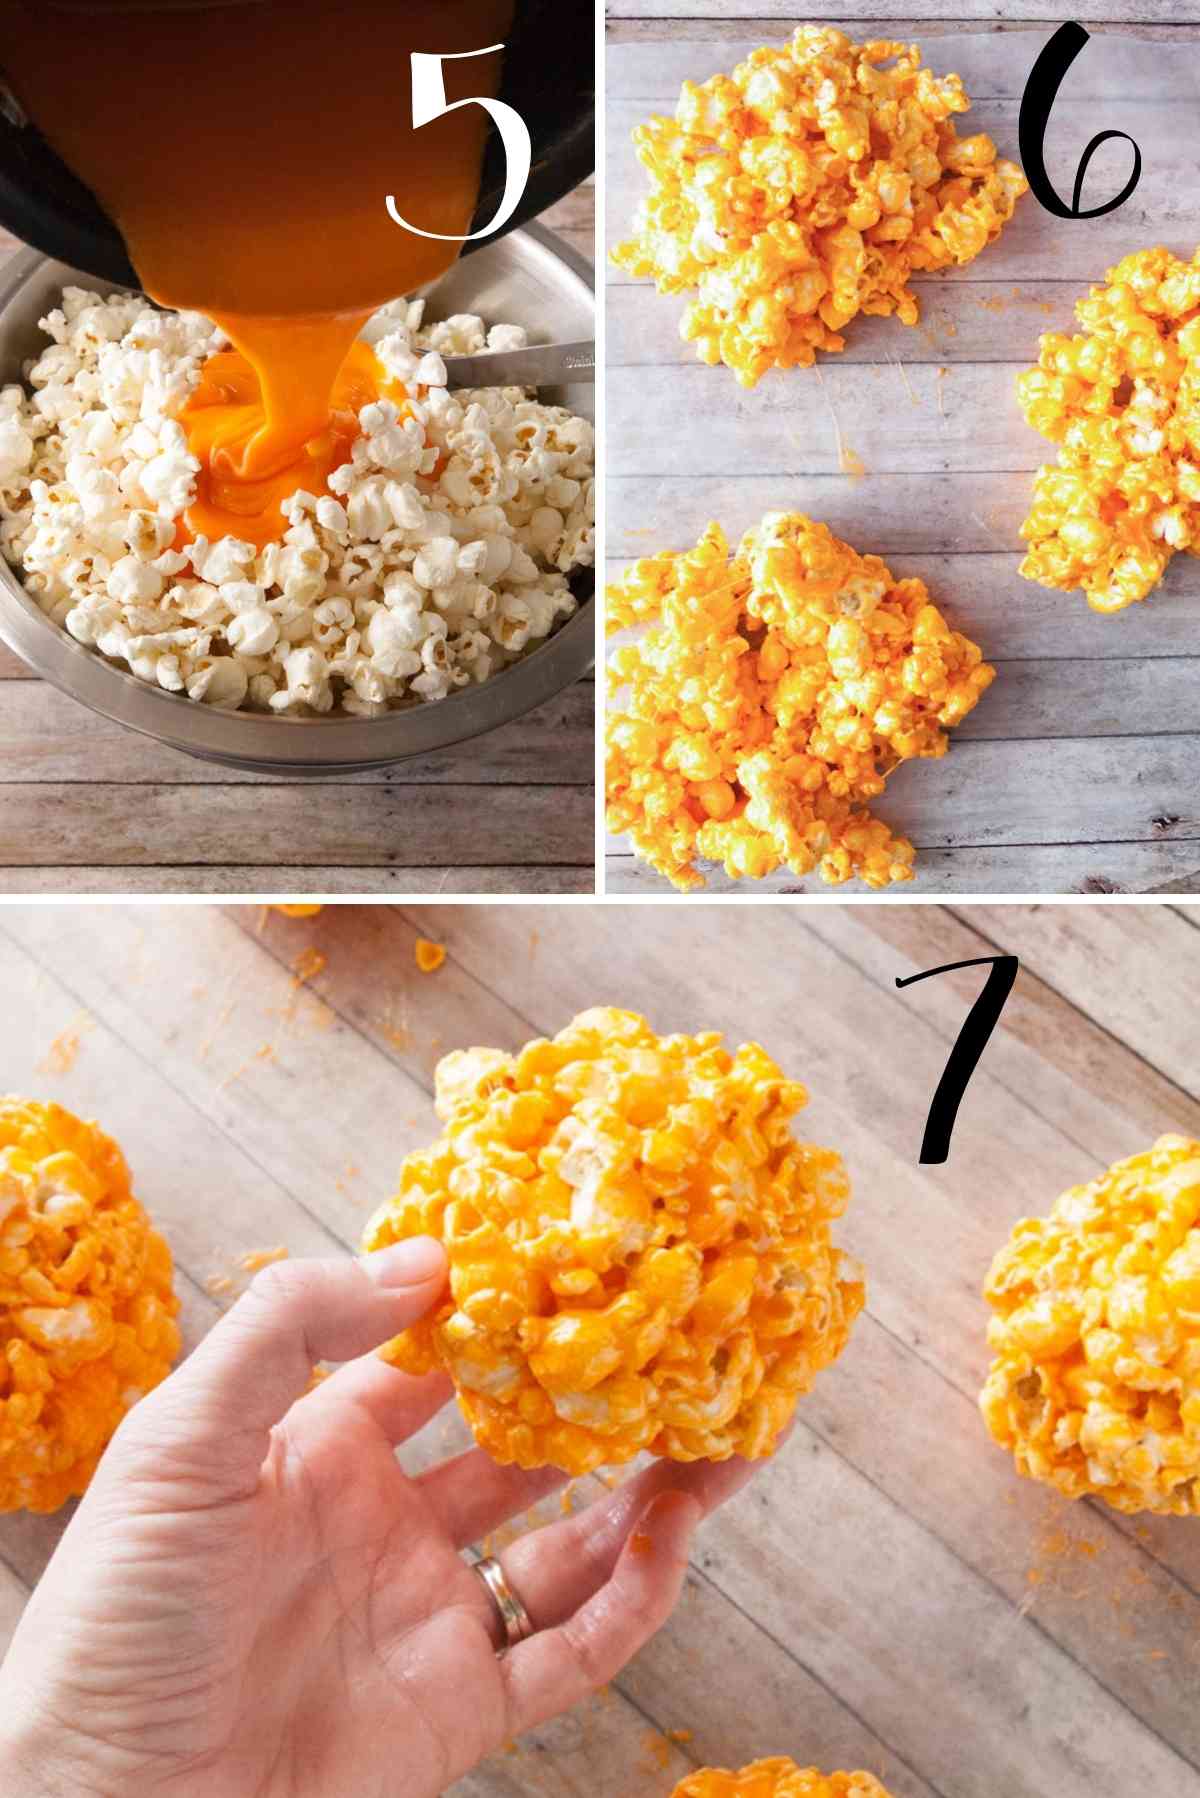 Pour the hot marshmallow over the popcorn, mix and shape into balls.